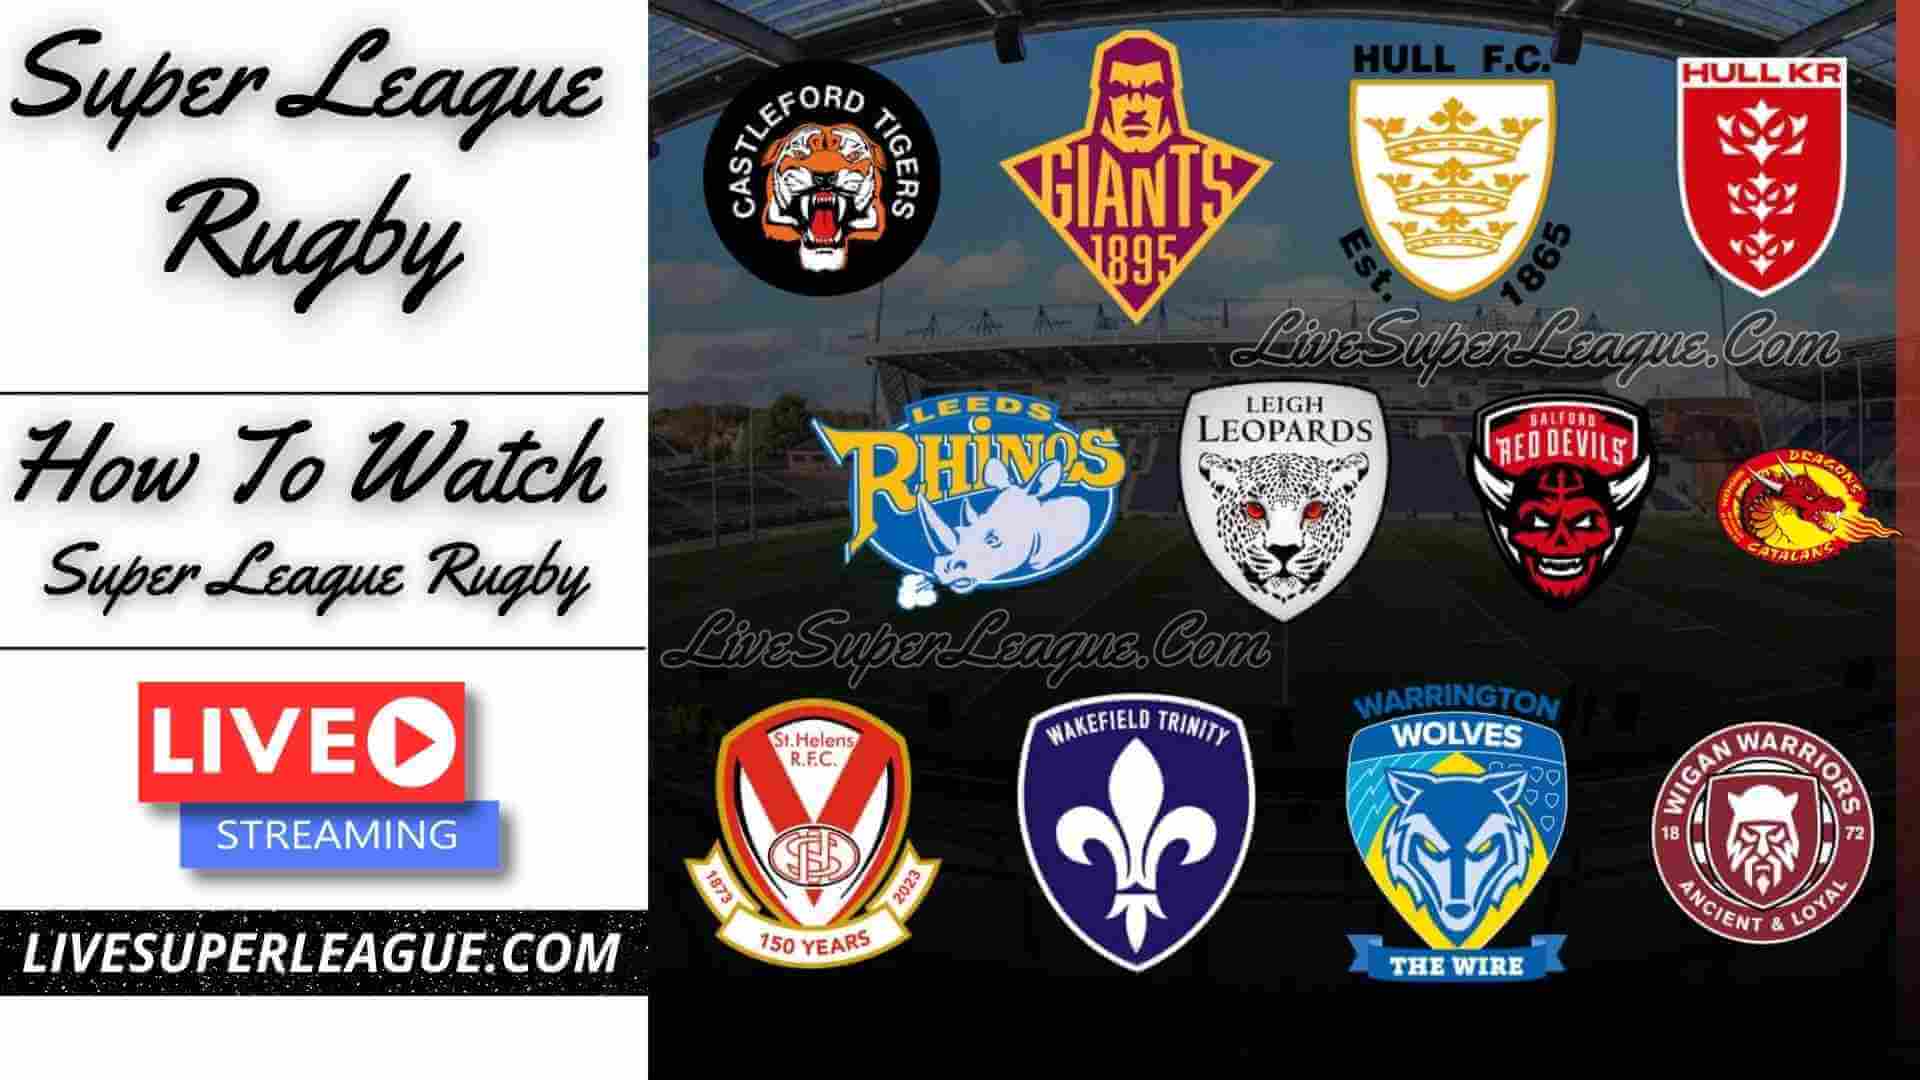 How To Watch Super League Rugby Online